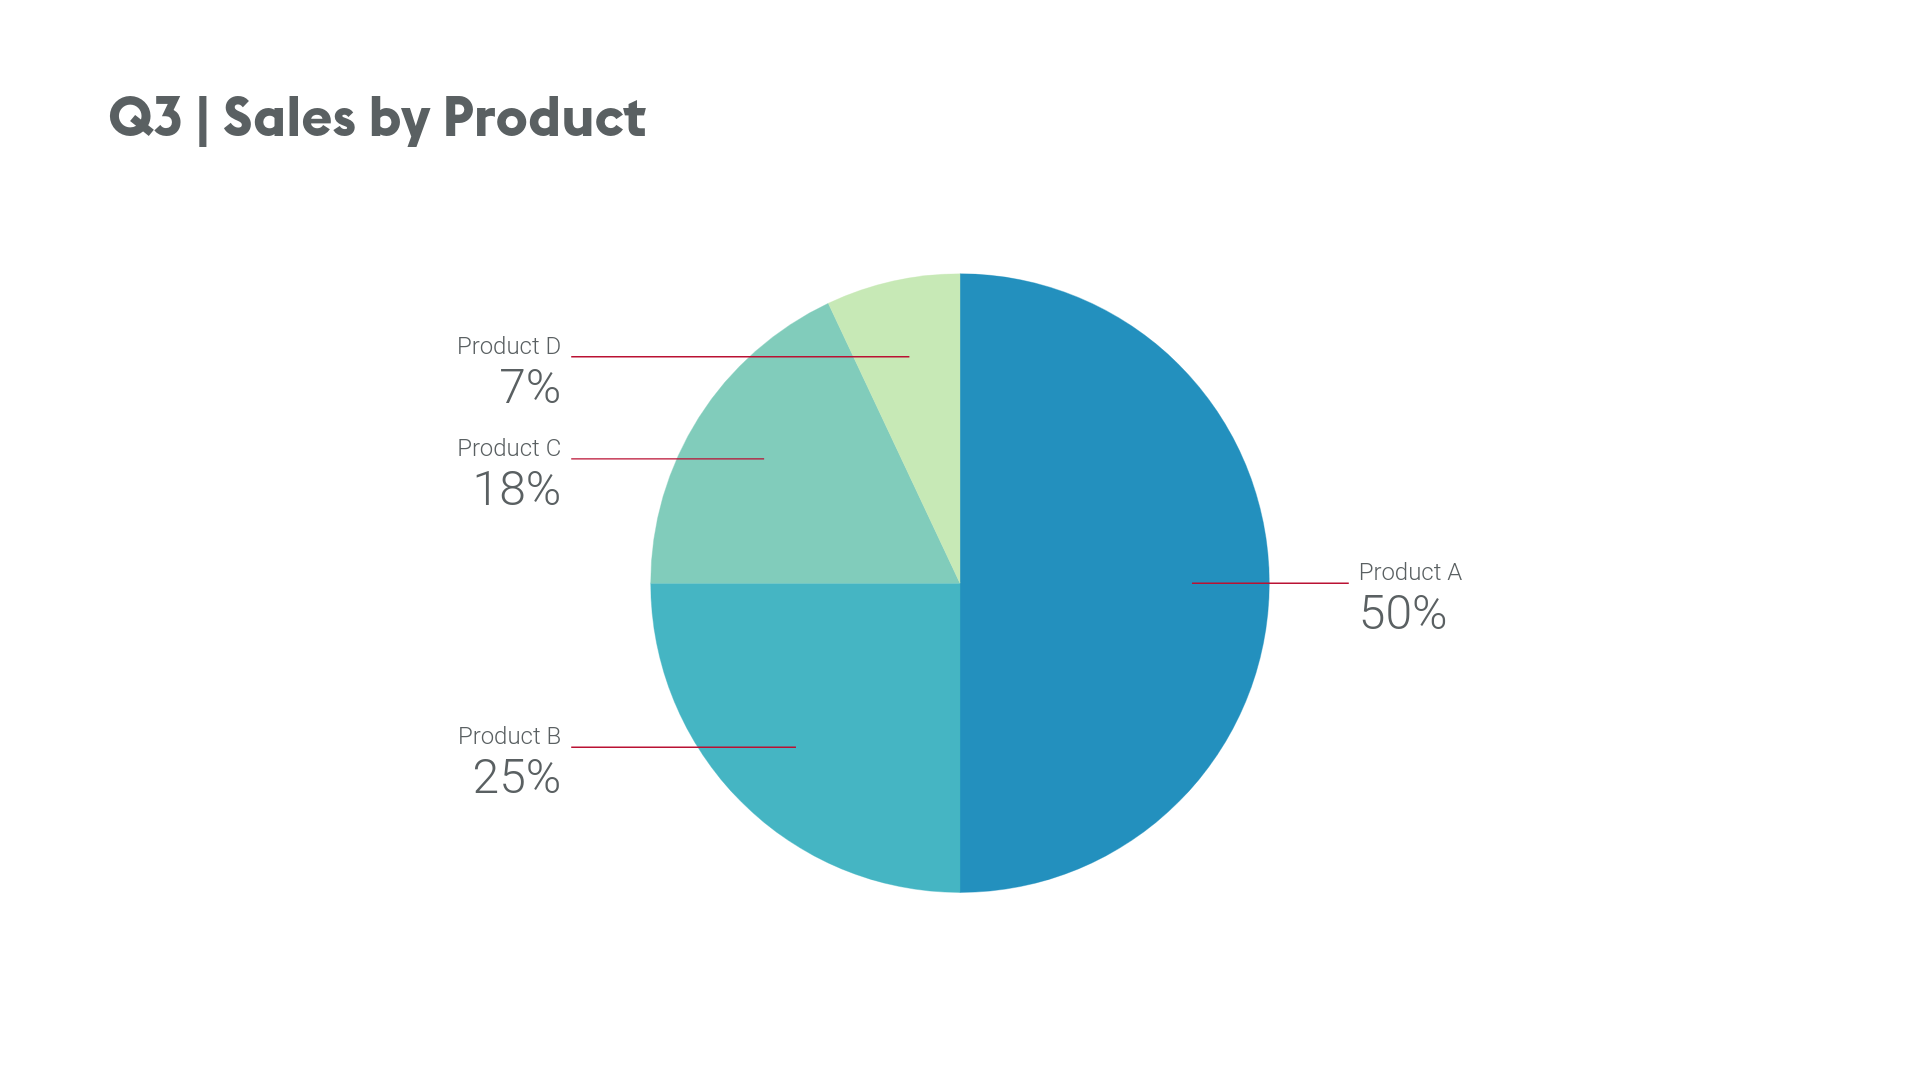 This pie chart shows the composition of the quartely sales by product